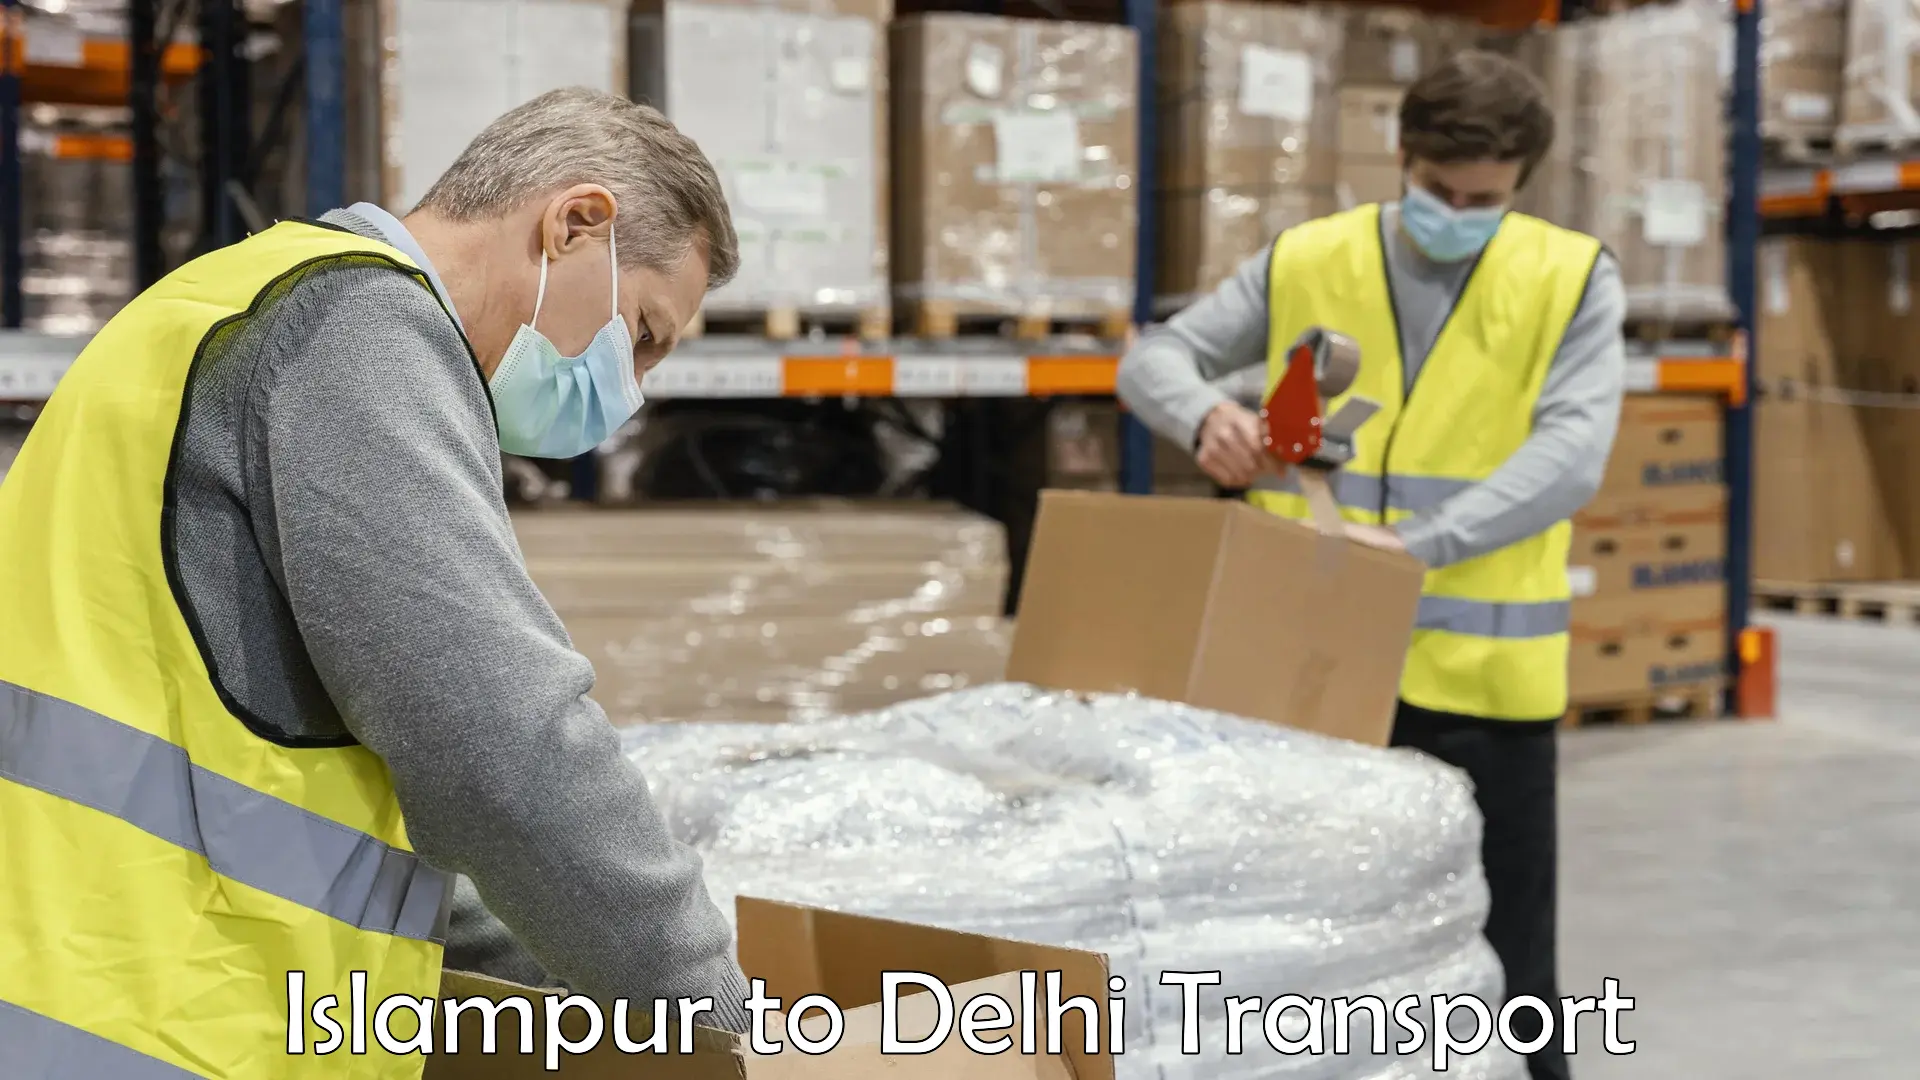 Shipping partner Islampur to NCR